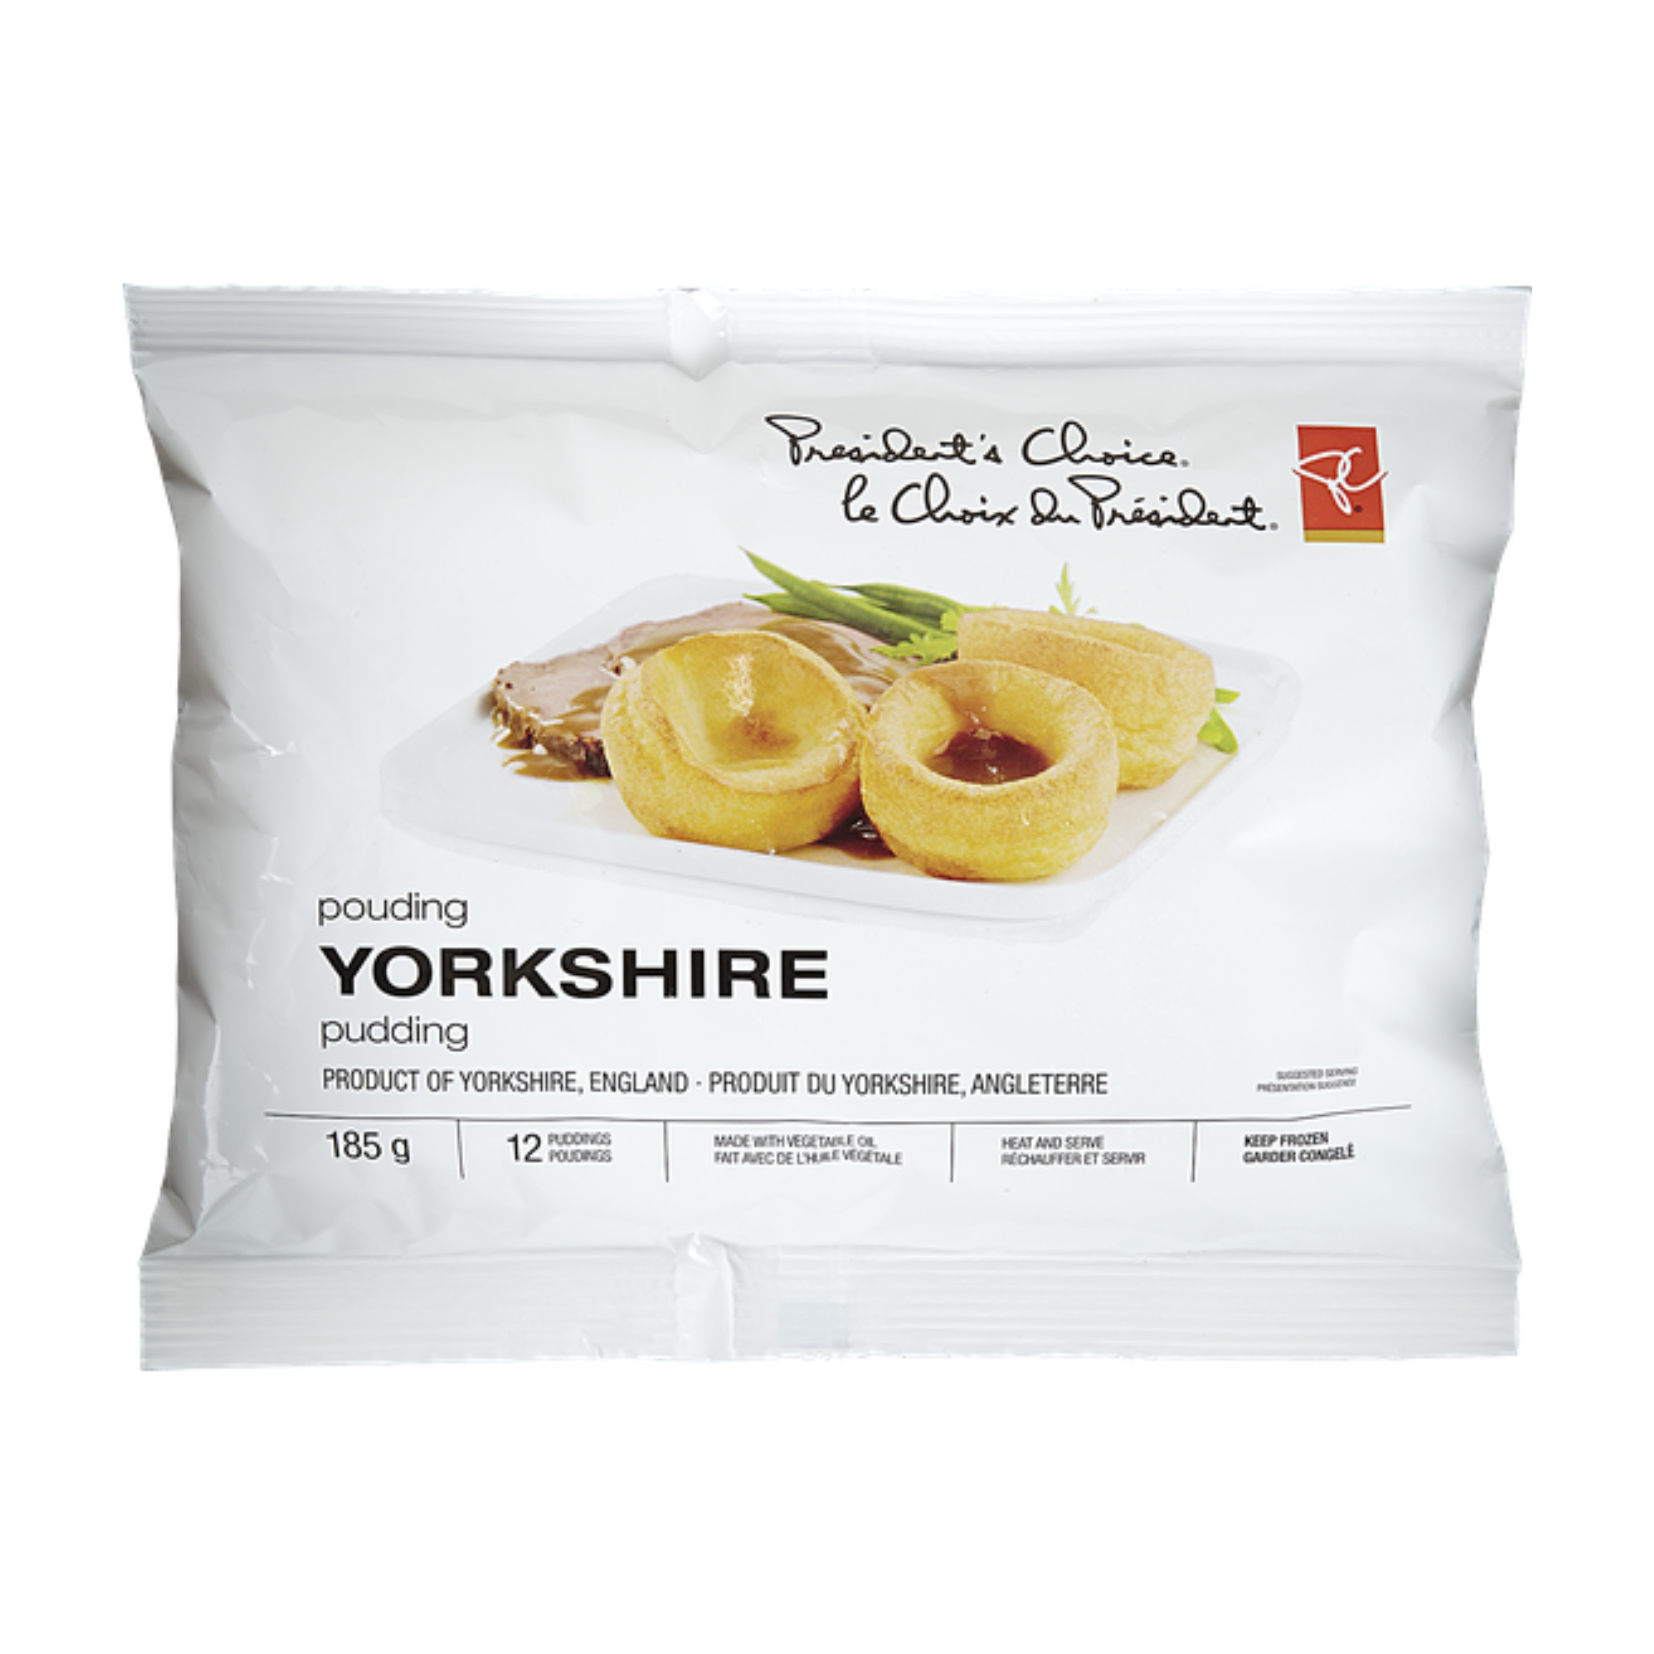 President's Choice Yorkshire Pudding 185g